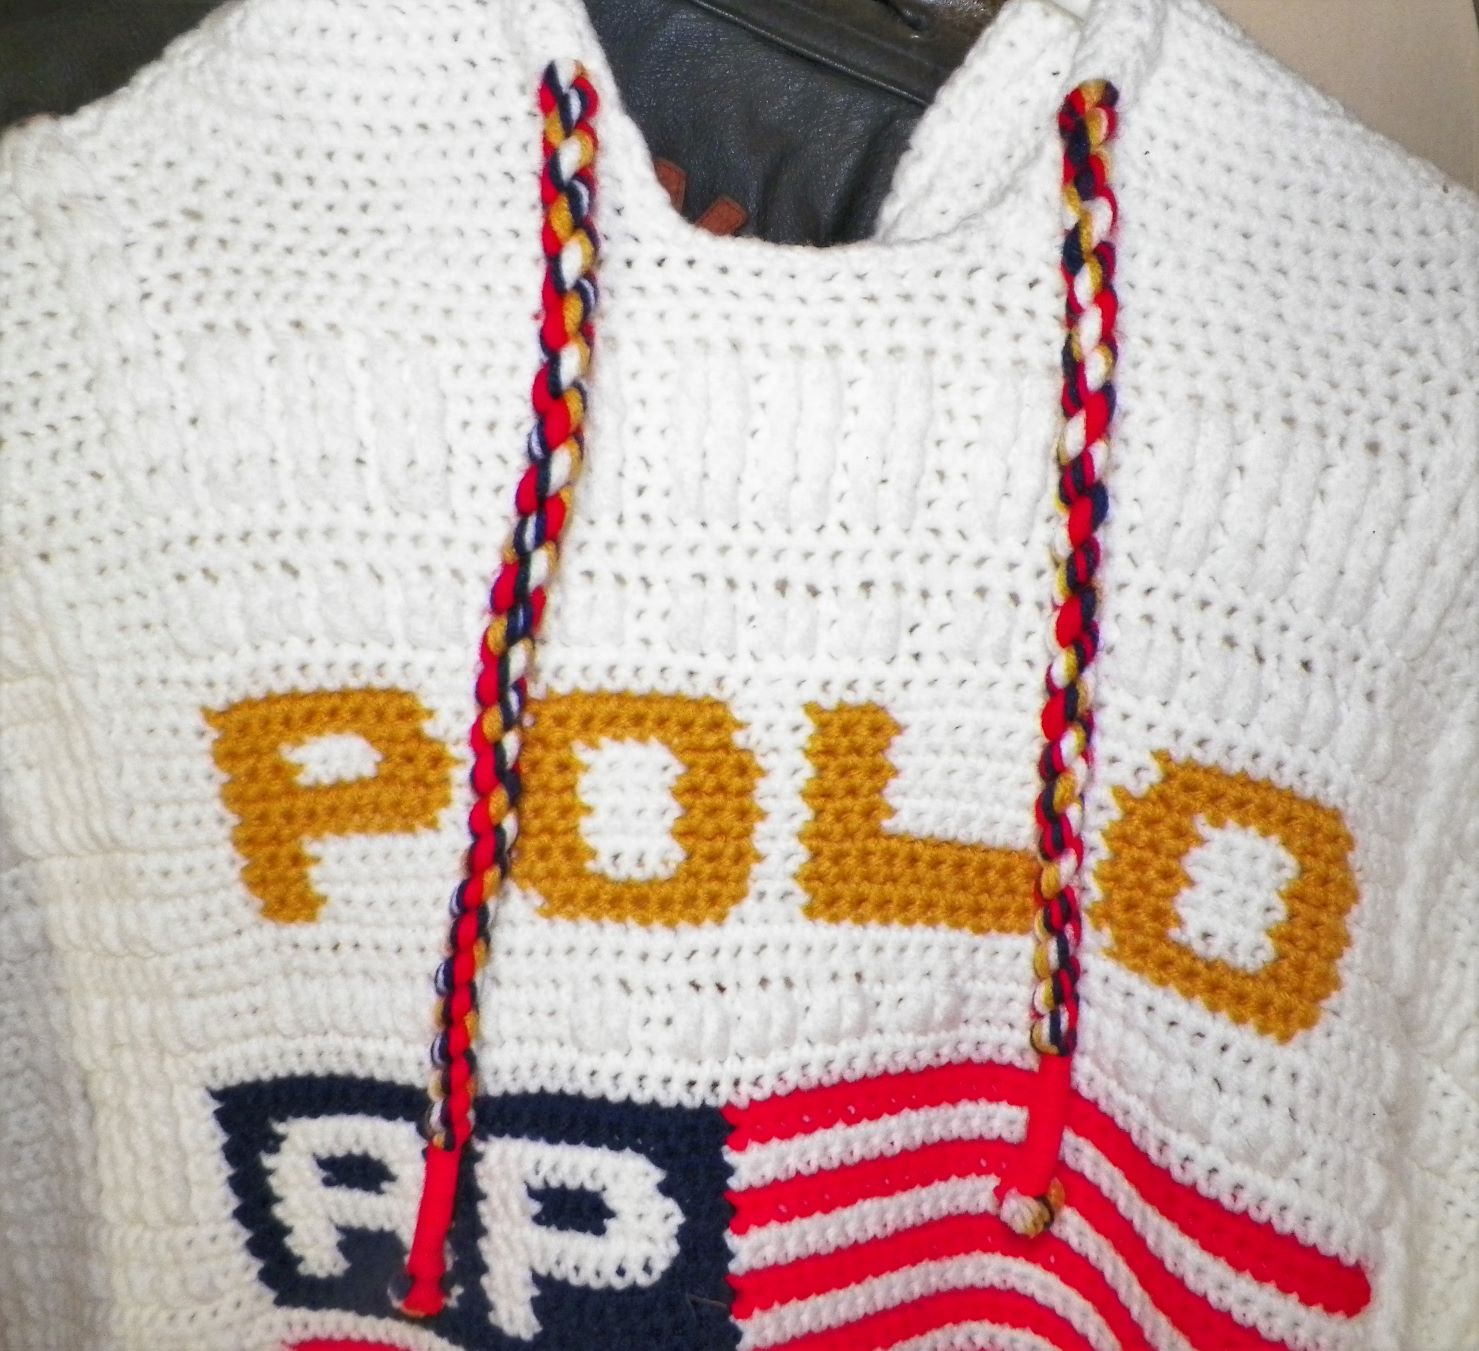 CLOTHES POLO SWEATER 2AA.JPG